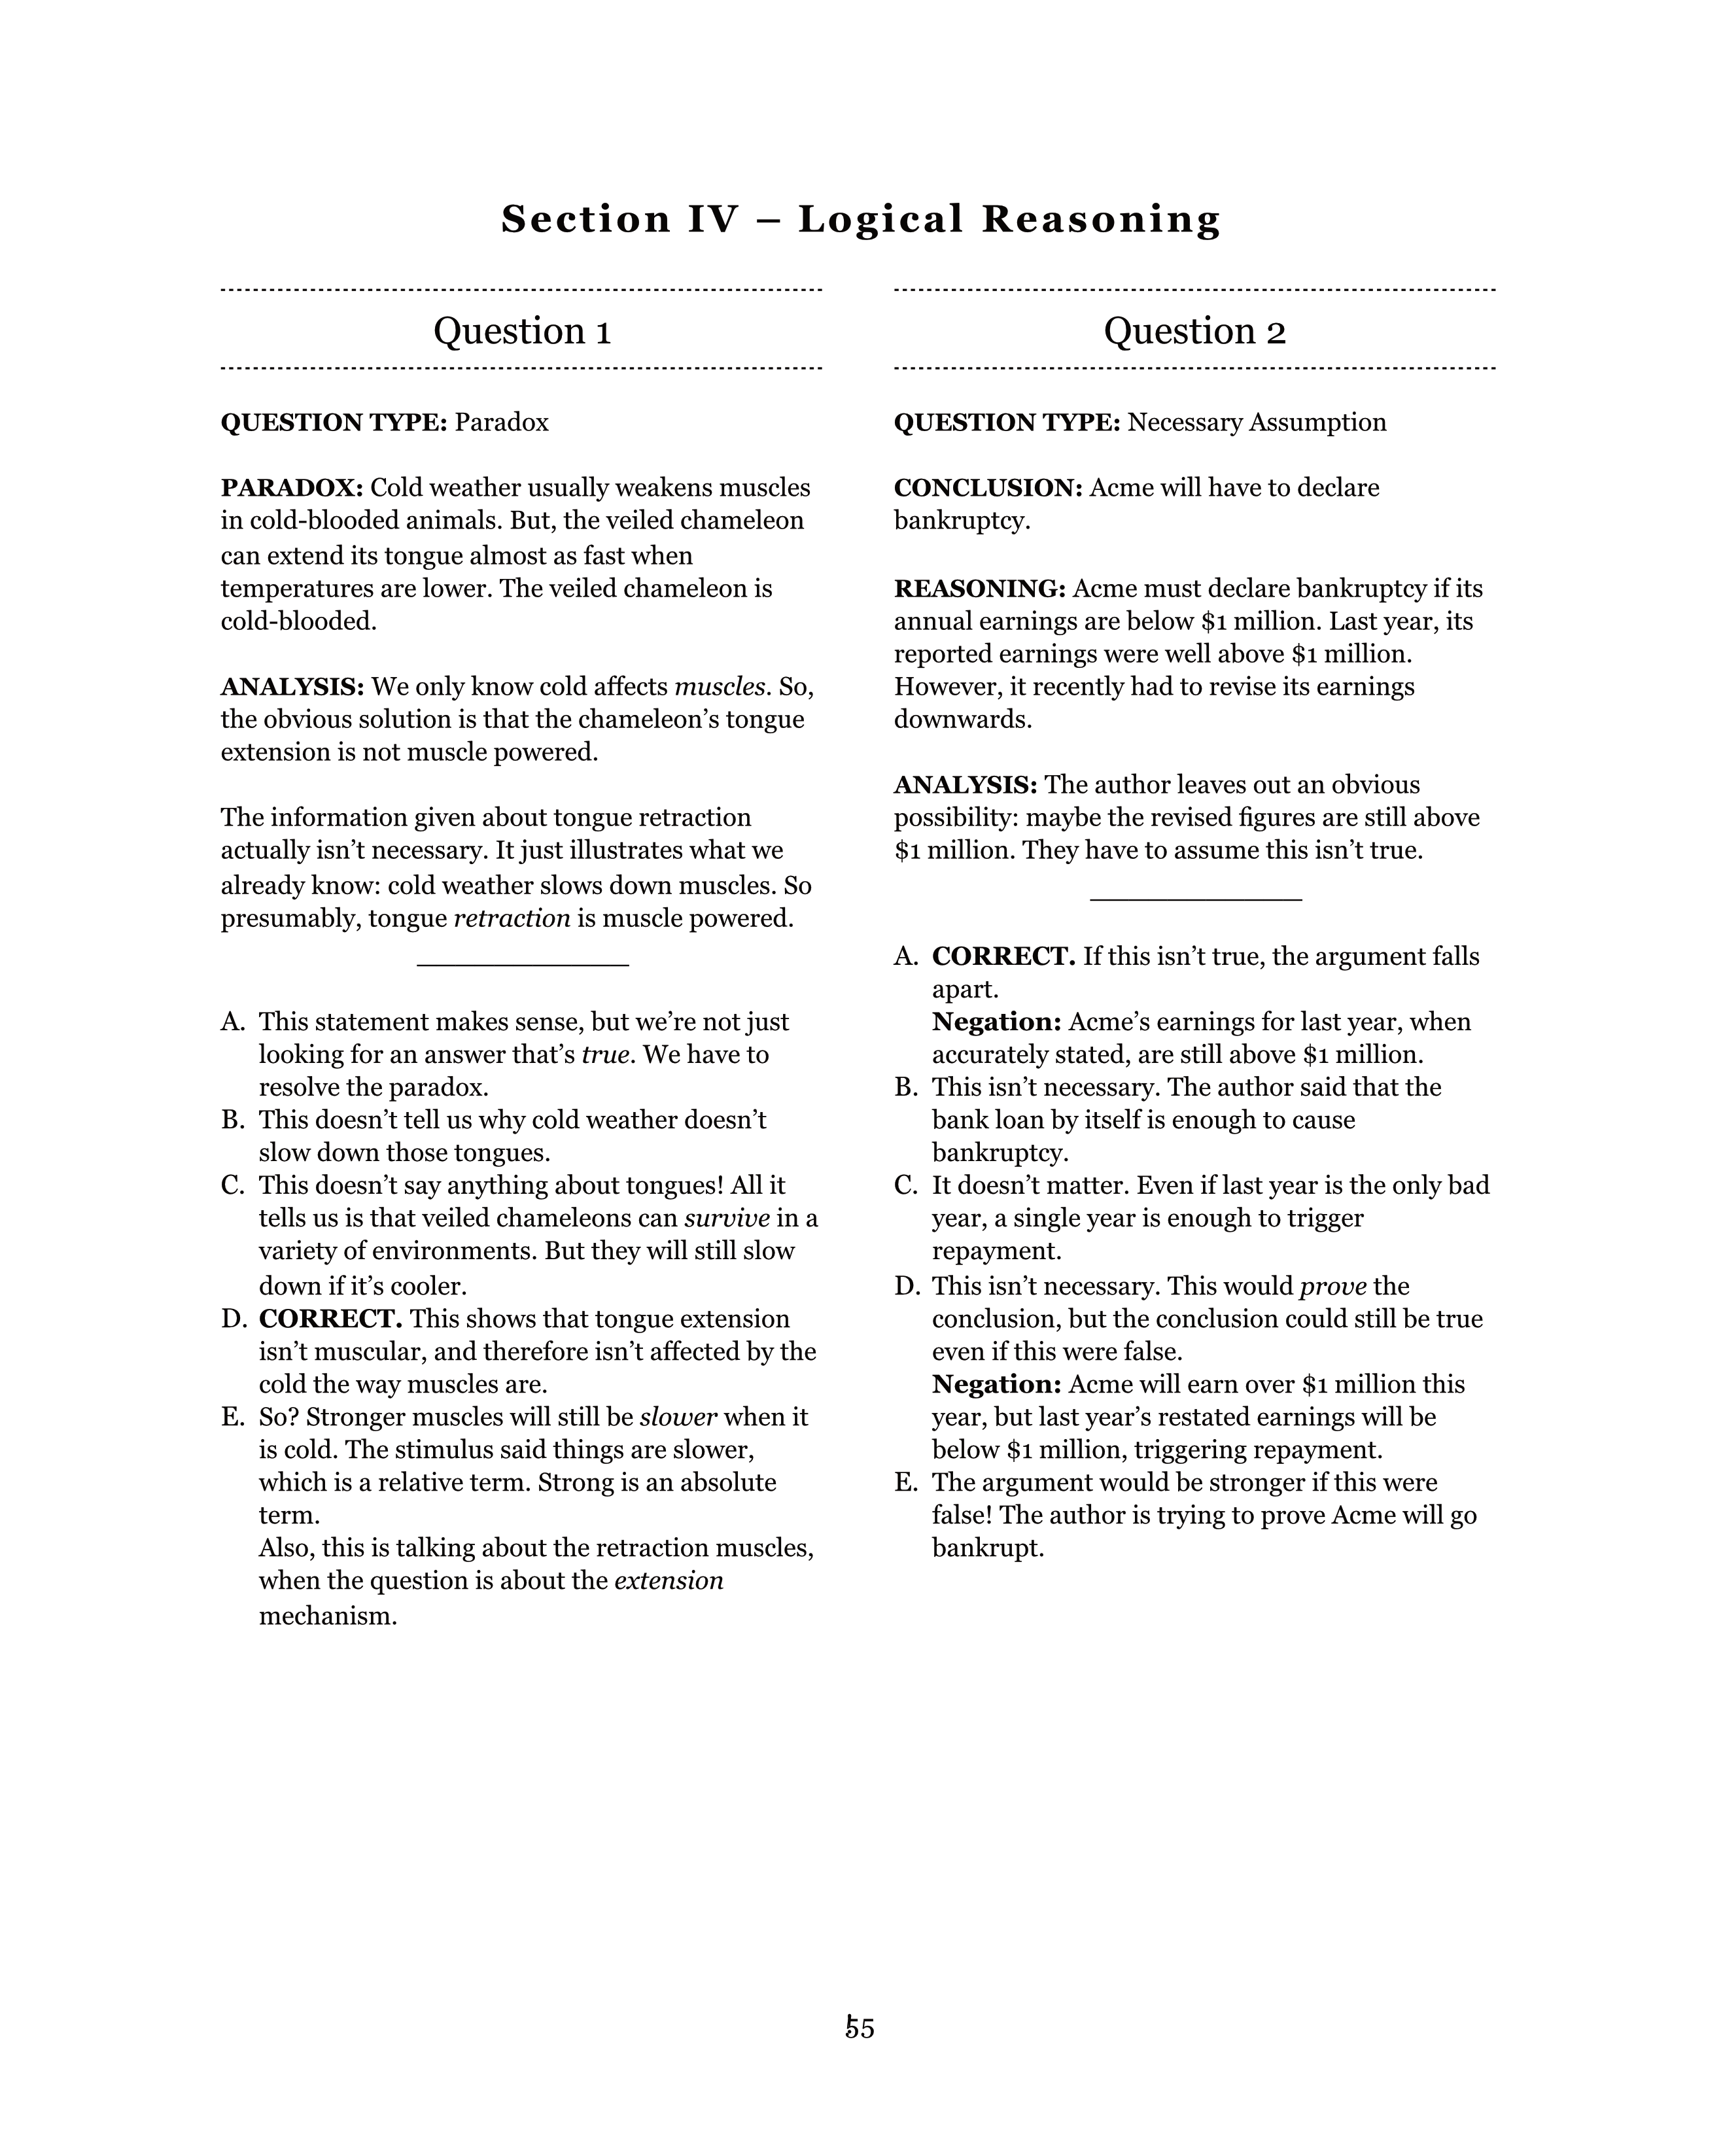 PrepTest 79 Logical Reasoning B (Section 4) Explanations